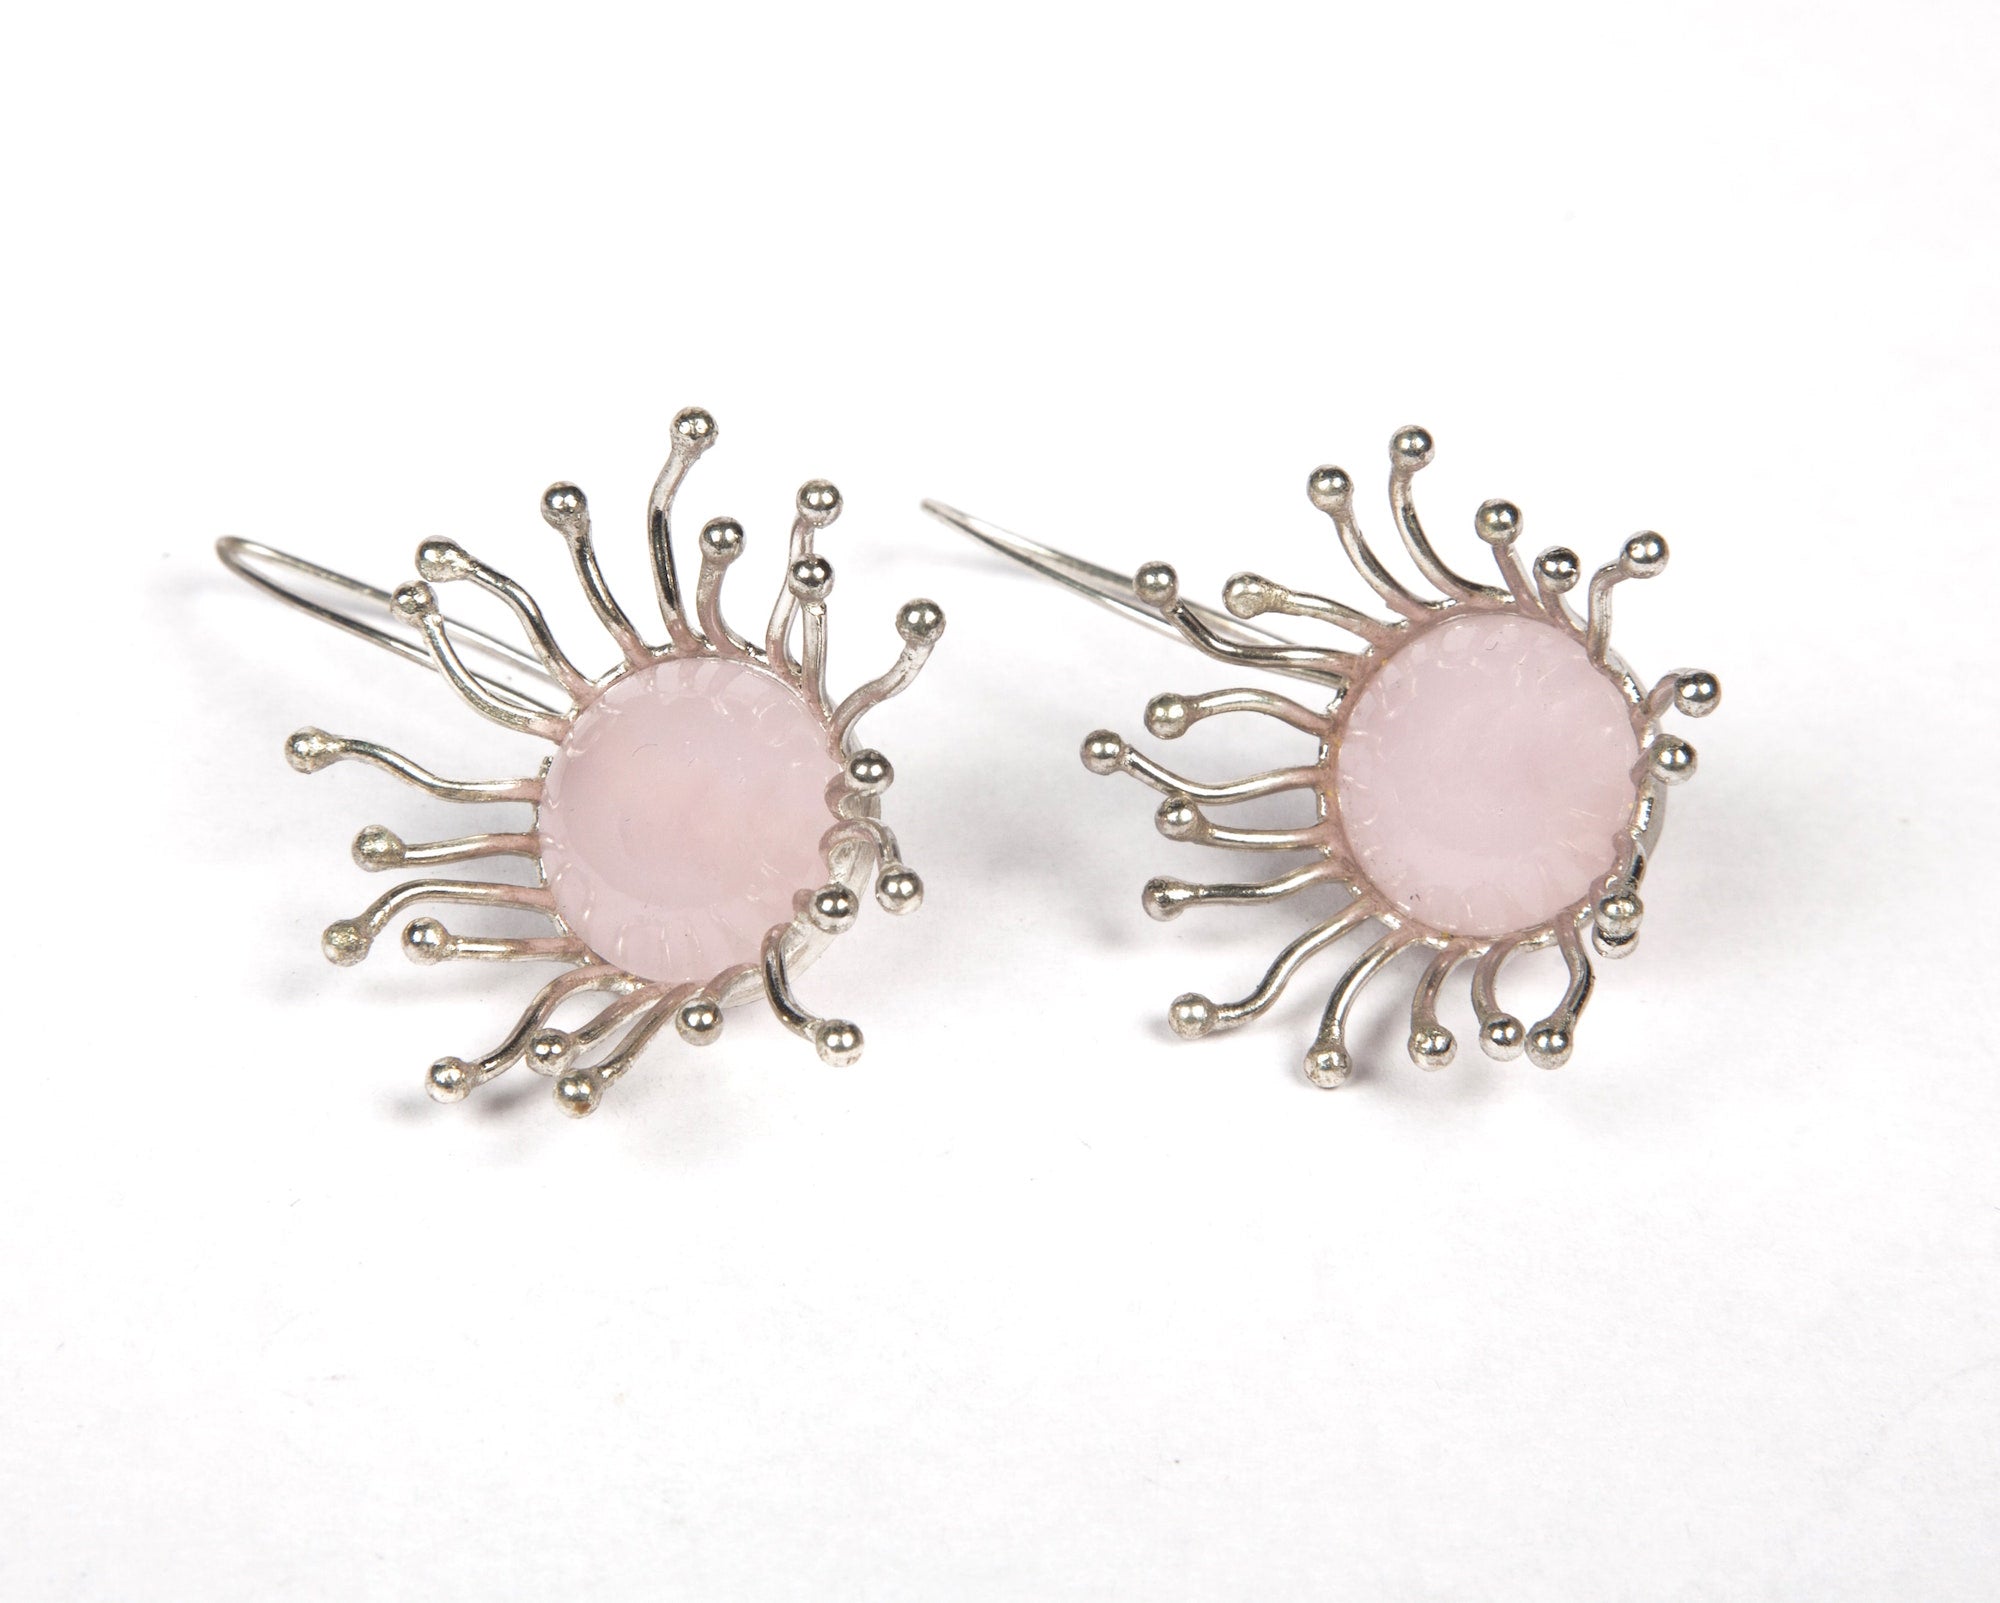 Rose quartz earrings with sterling silver polish